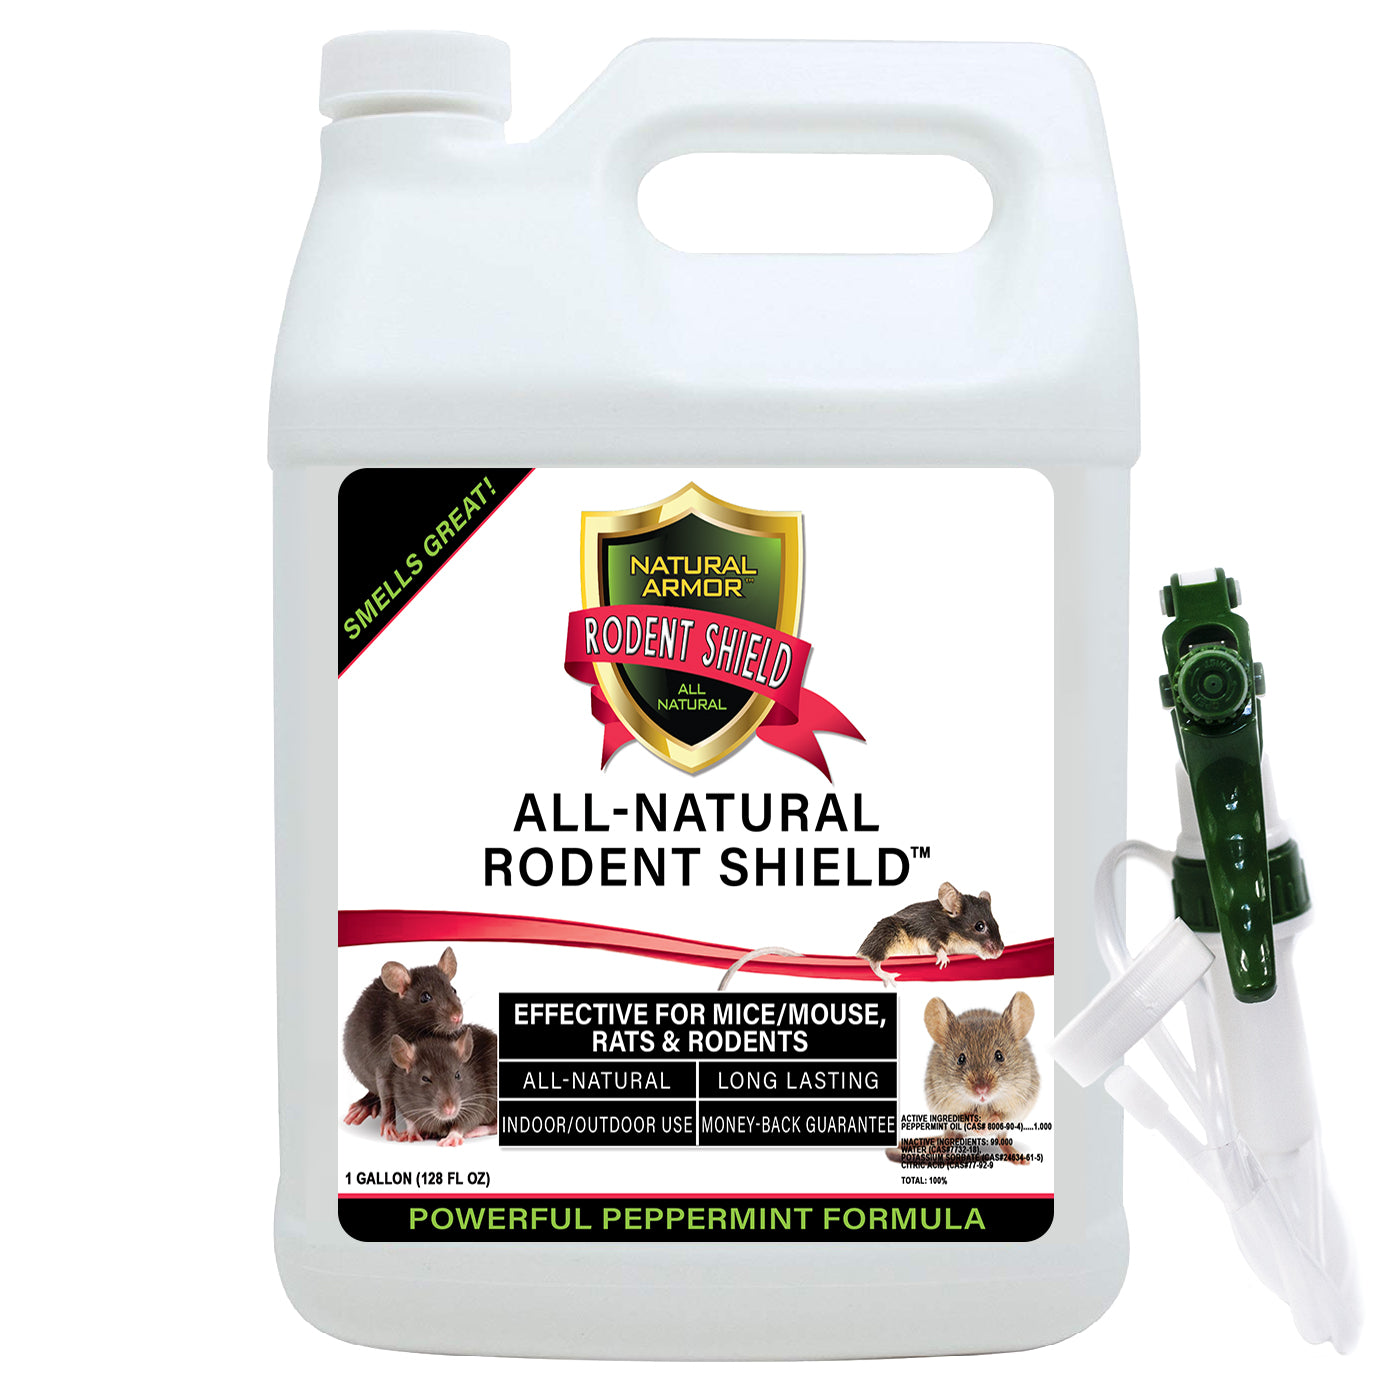 potent rodents repellents/control that works in every situation